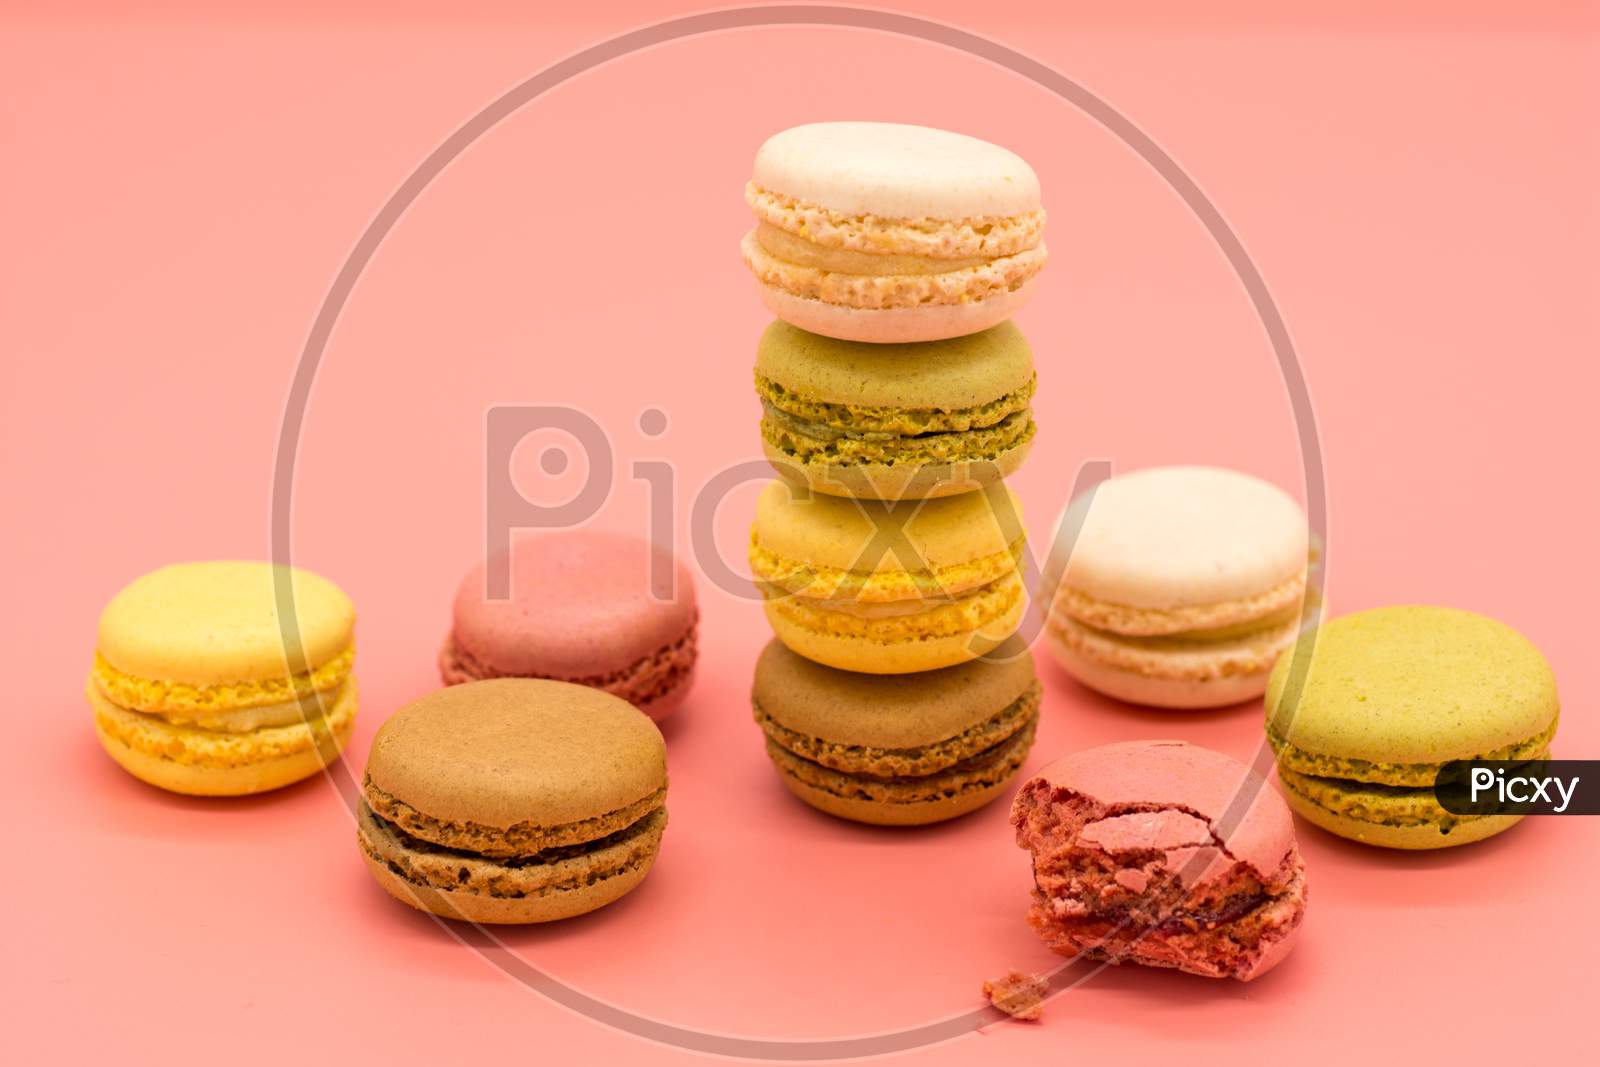 delicious macarons full and bitten and crumbs arranged on colored background